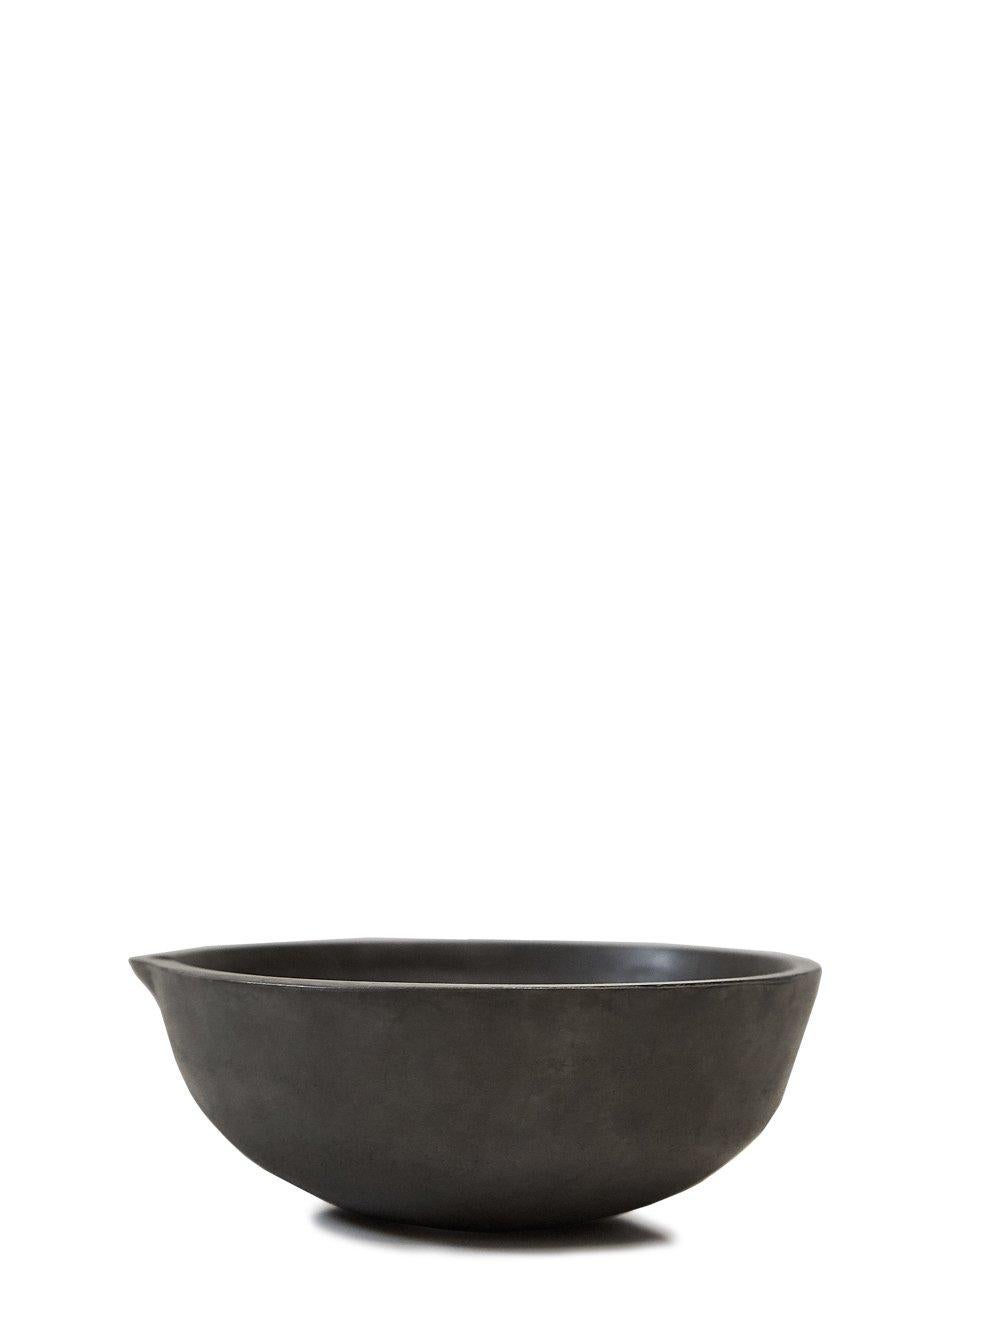 Bronze bowl by Rick Owens
2007
Dimensions: L 14 x W 14 x H 8 cm
Materials: Bronze
Weight: 1.5 kg

Available in Black finish or Nitrate (Dark Brown) finish, please contact us.

Rick Owens is a California-born fashion and furniture has developed a